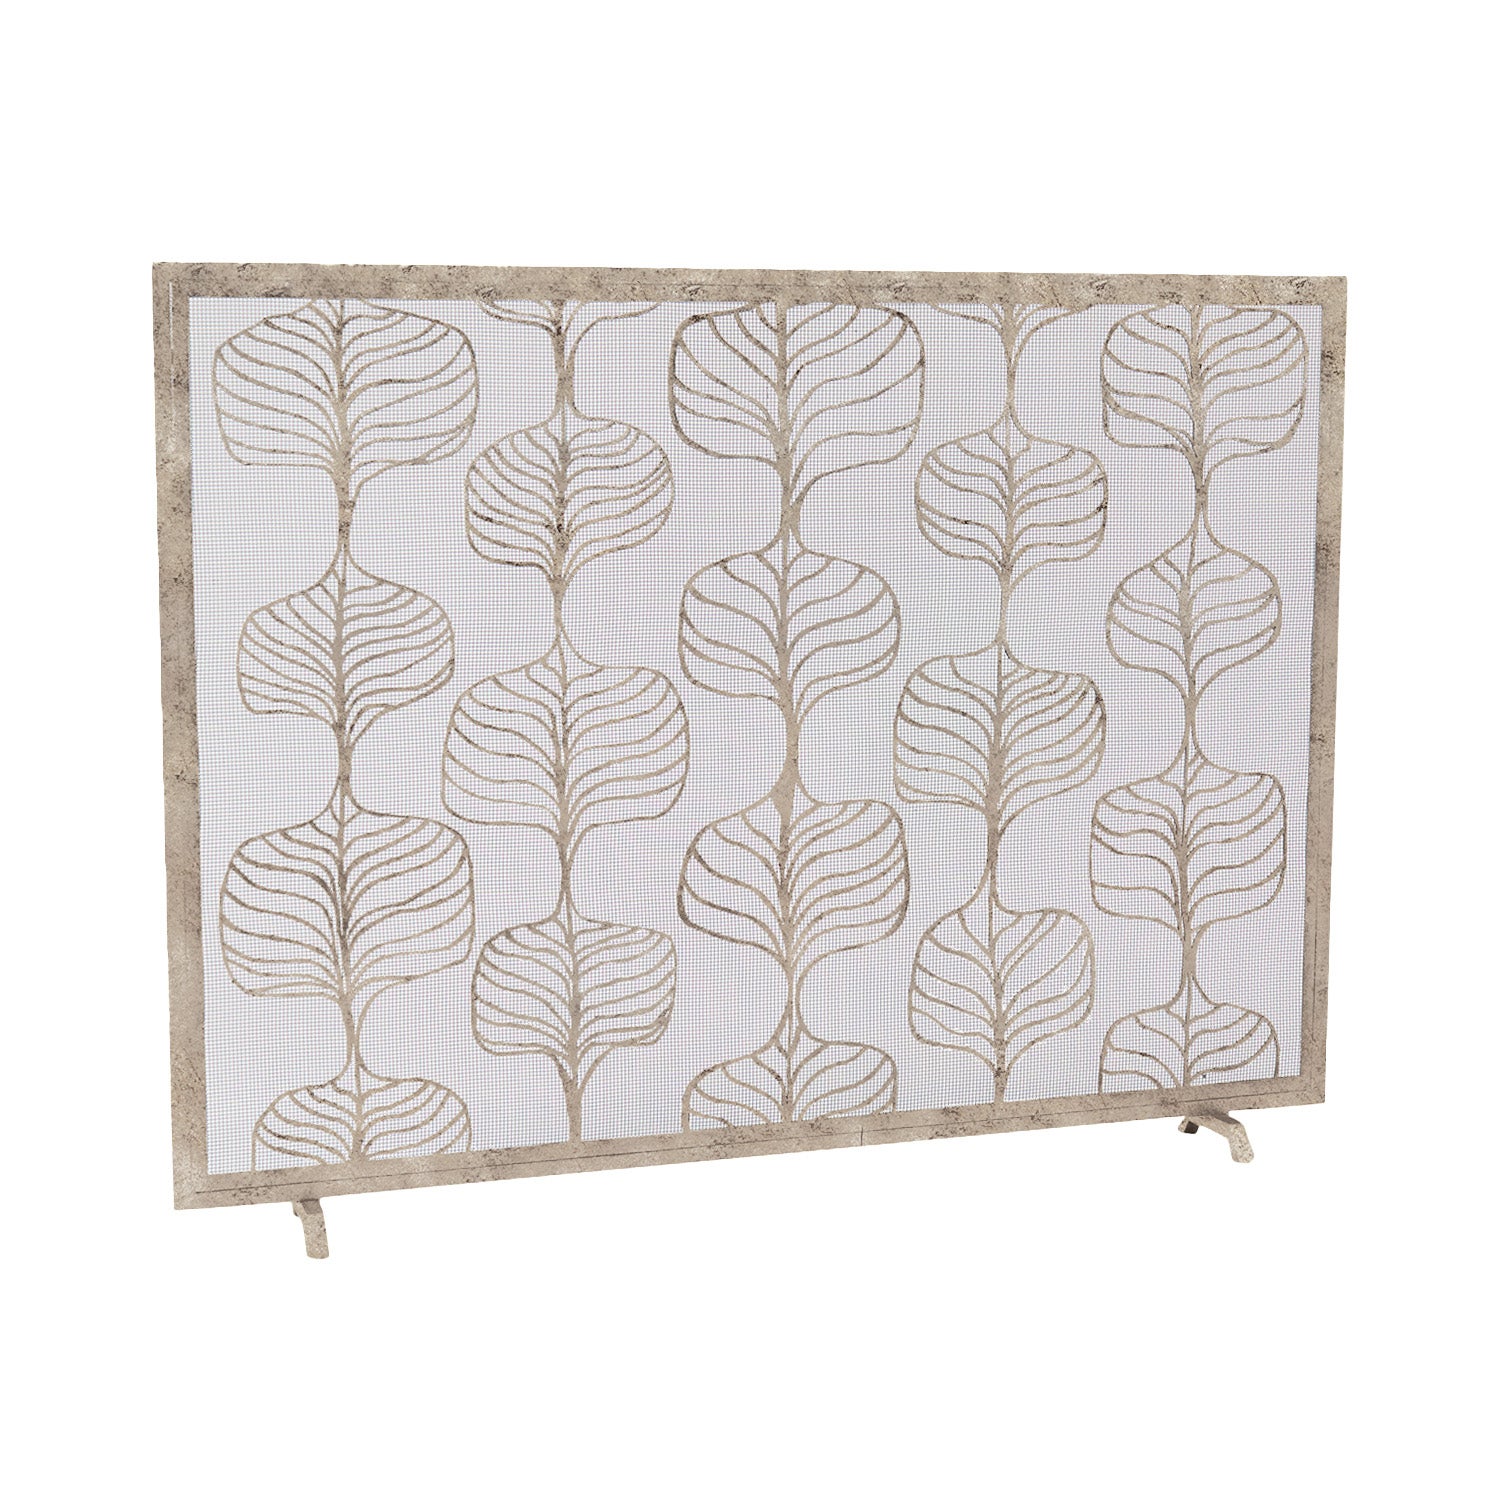 Fig Leaf Fireplace Screen in a Aged Silver Finish